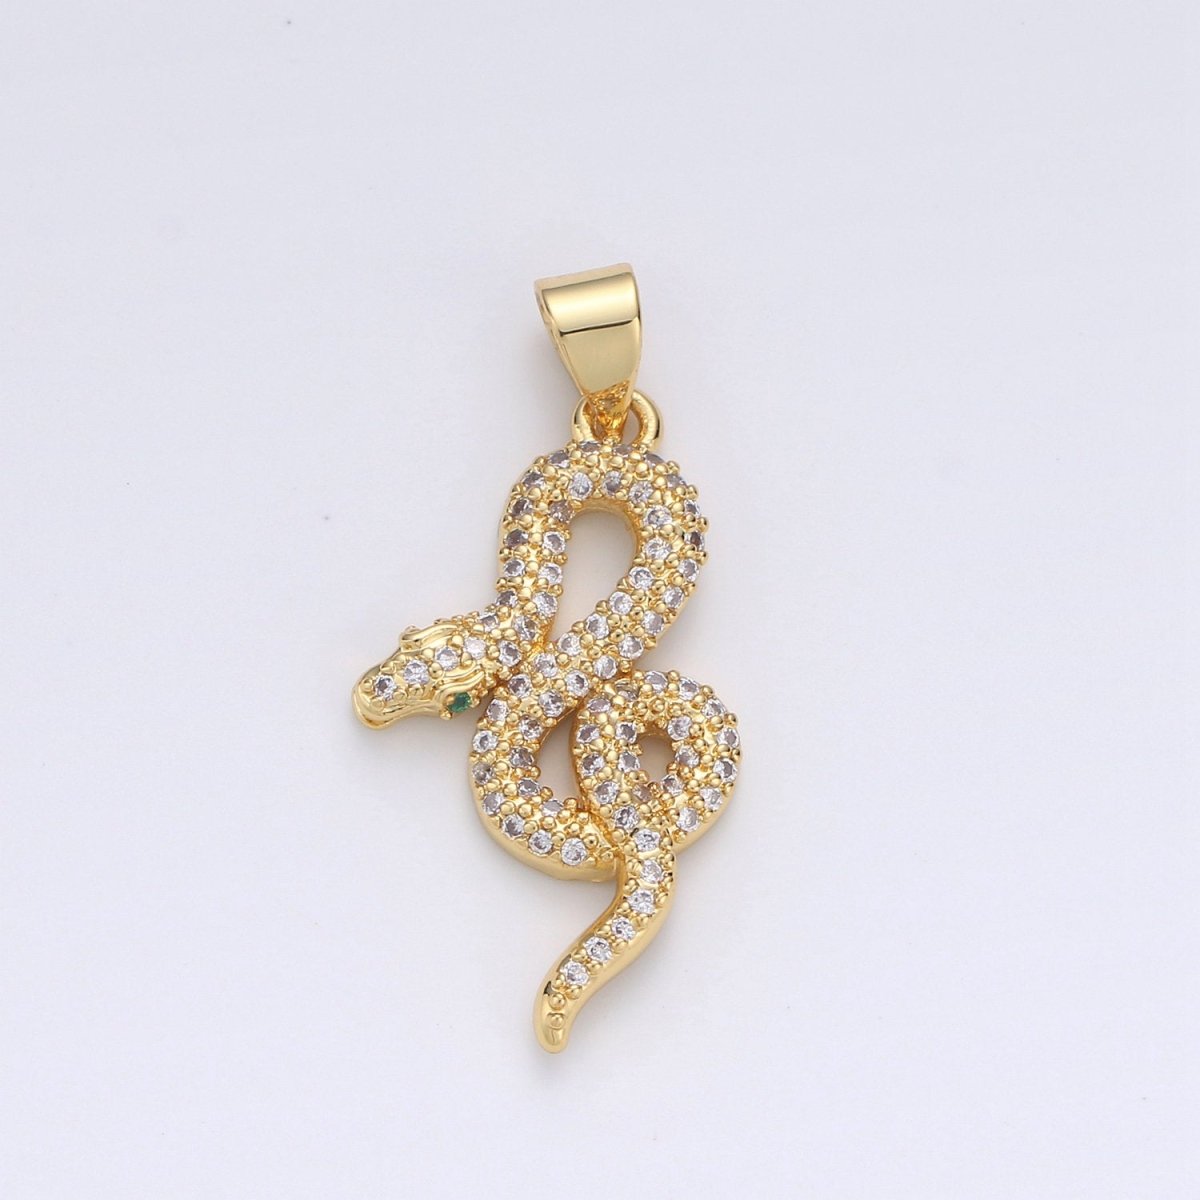 Cubic Gold snake charm Pendant, Micro Pave snake charms, Dainty pendant Jewelry in 14k Gold Filled I-662 I-663 - DLUXCA